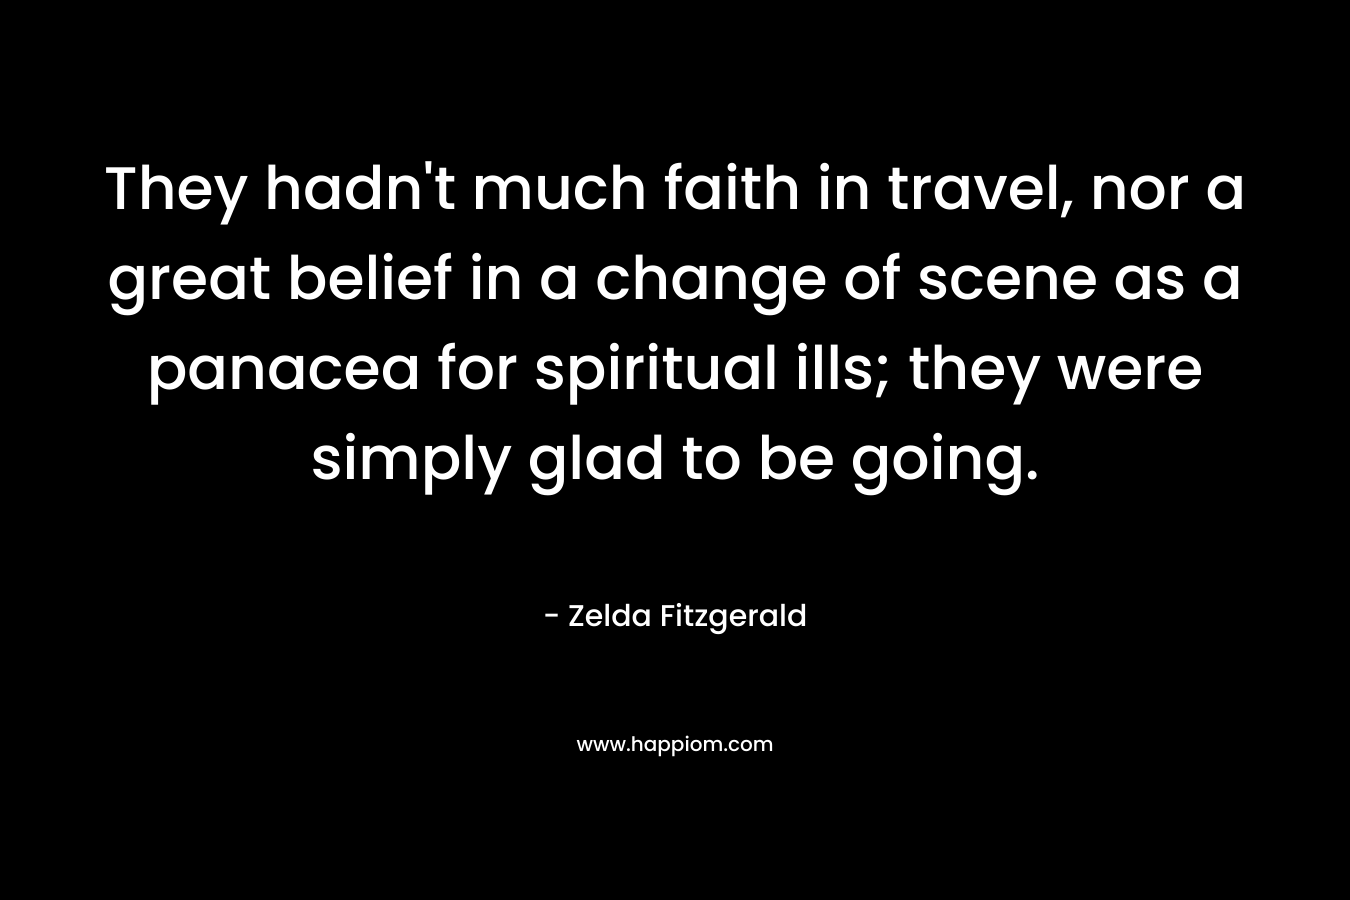 They hadn’t much faith in travel, nor a great belief in a change of scene as a panacea for spiritual ills; they were simply glad to be going. – Zelda Fitzgerald